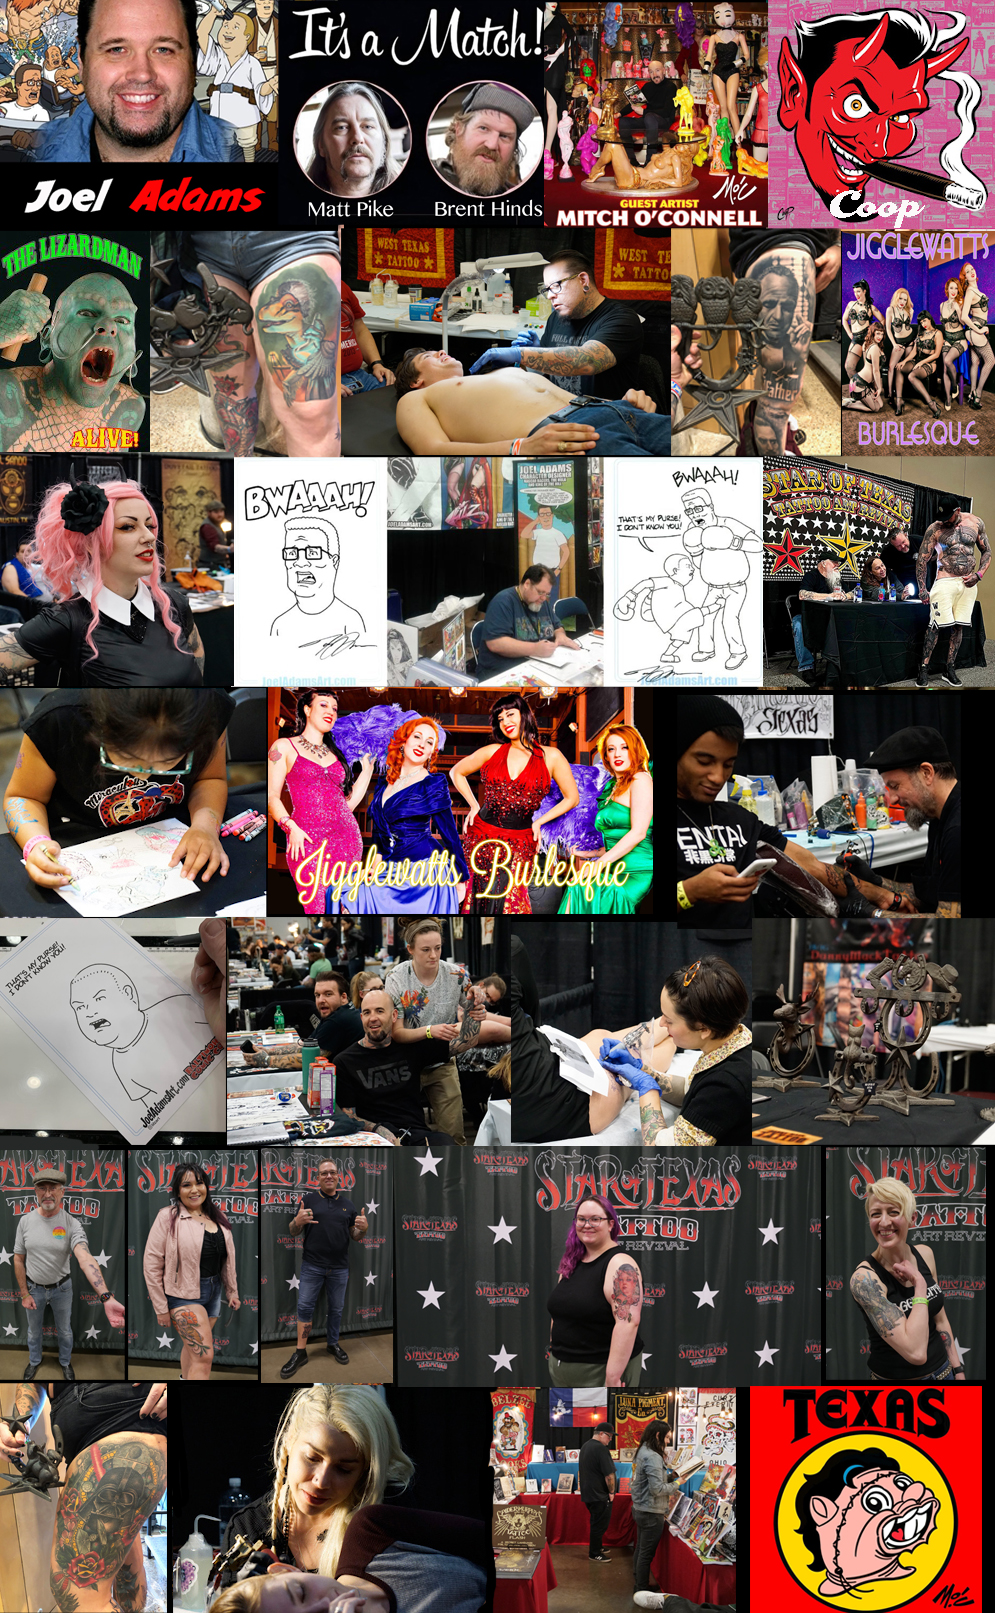 Tattoo Art Revival Attractions and Entertainment!